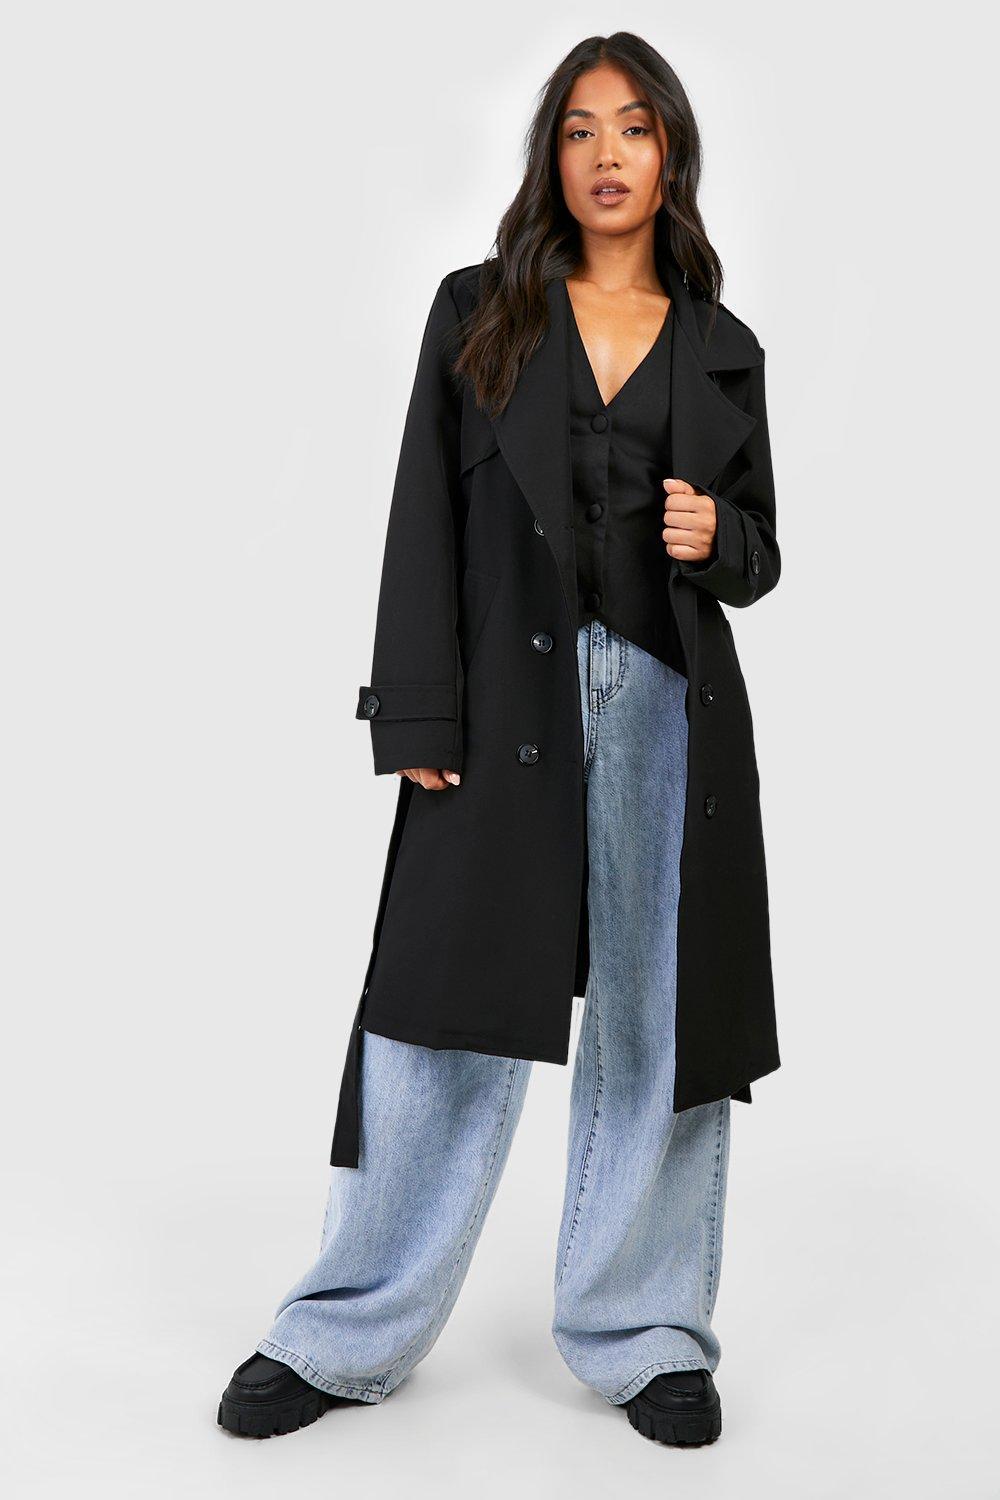 Boohoo Petite Button Detail Belted Trench Coat in Black | Lyst UK